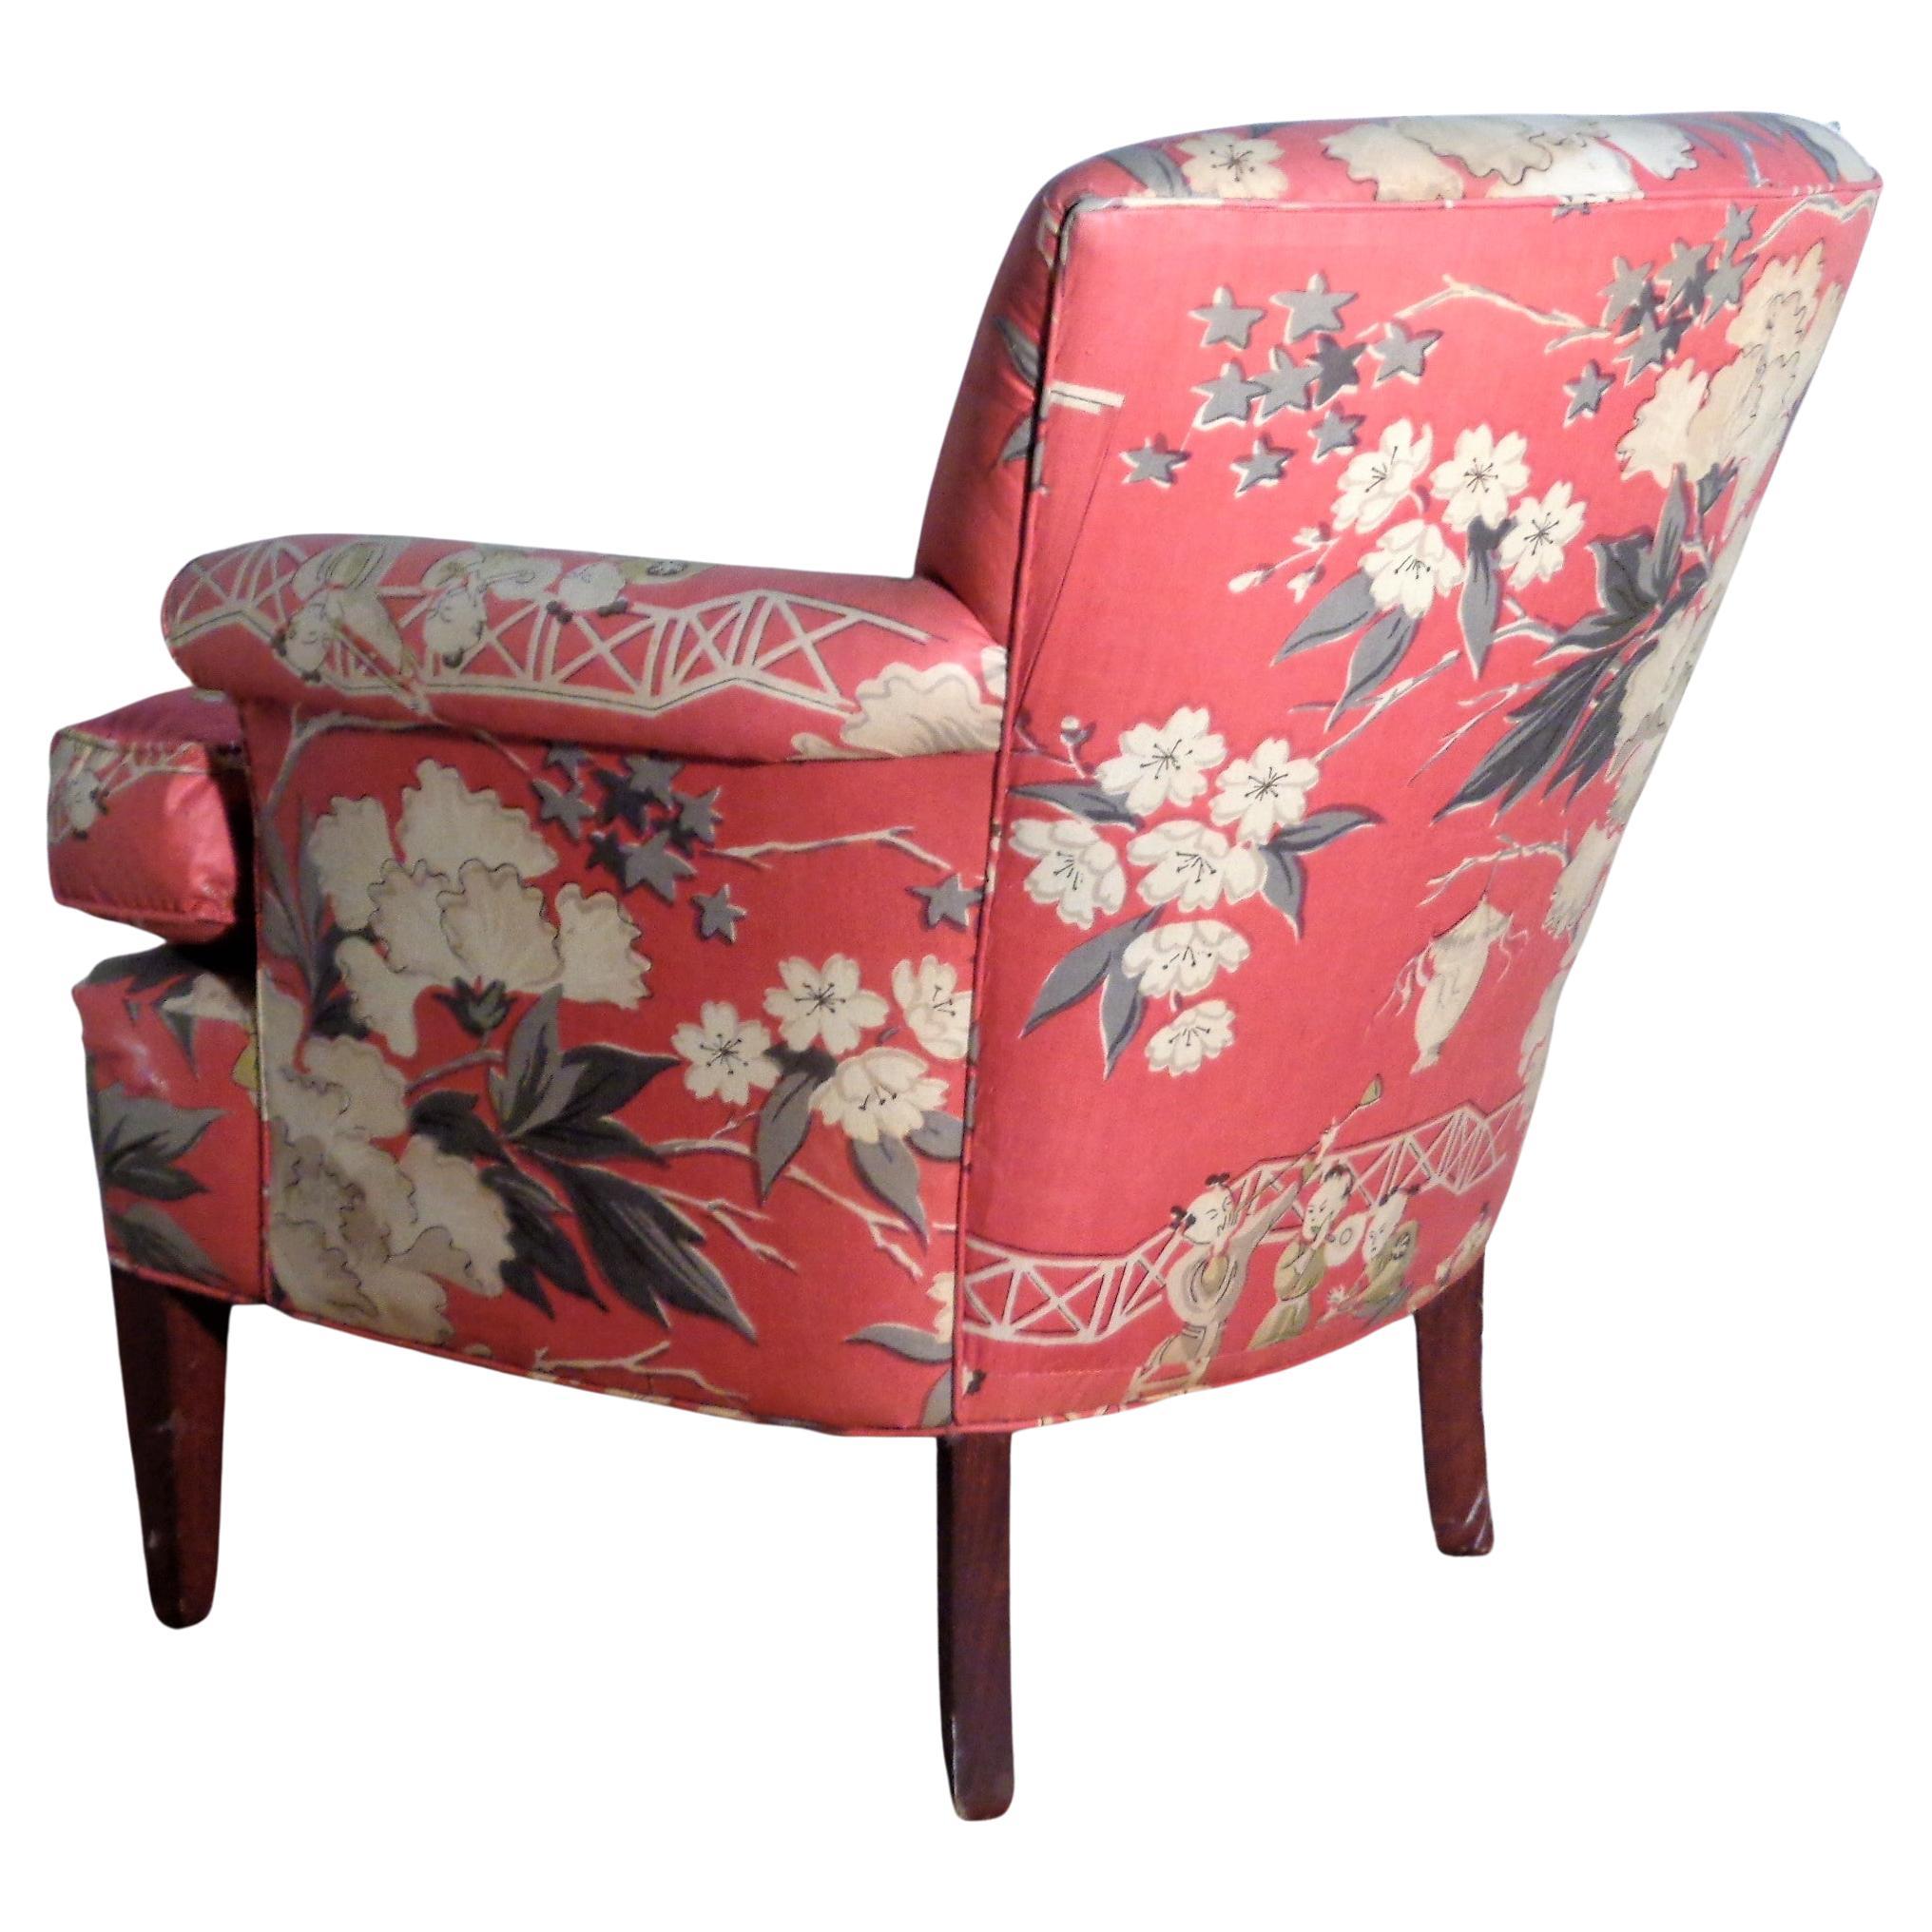 Mid-20th Century  Dorothy Draper Style Original Chinoiserie Upholstered Lounge Chair, 1940's For Sale